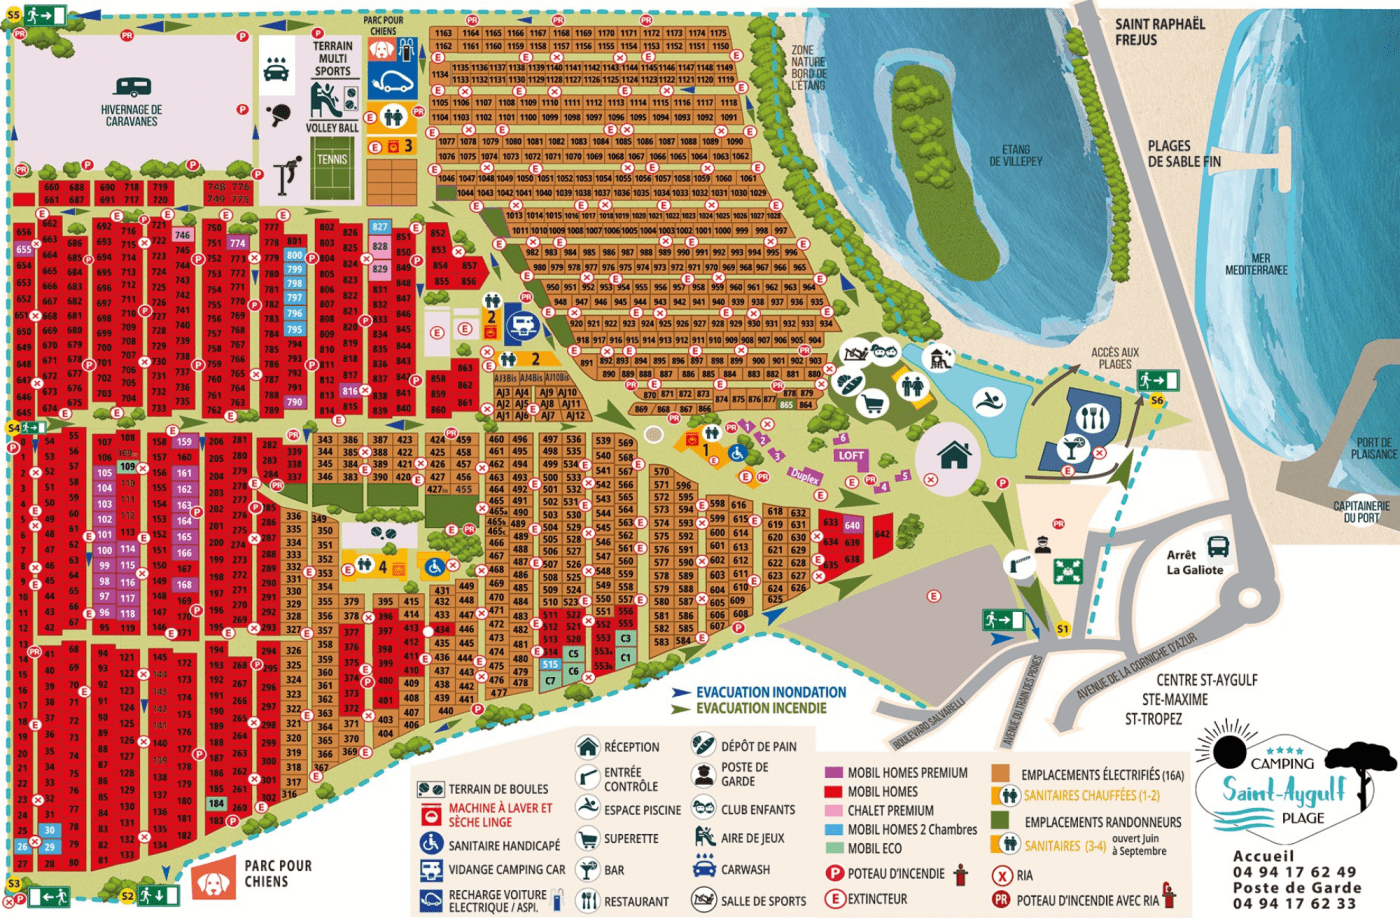 Download the campsite map in PDF format